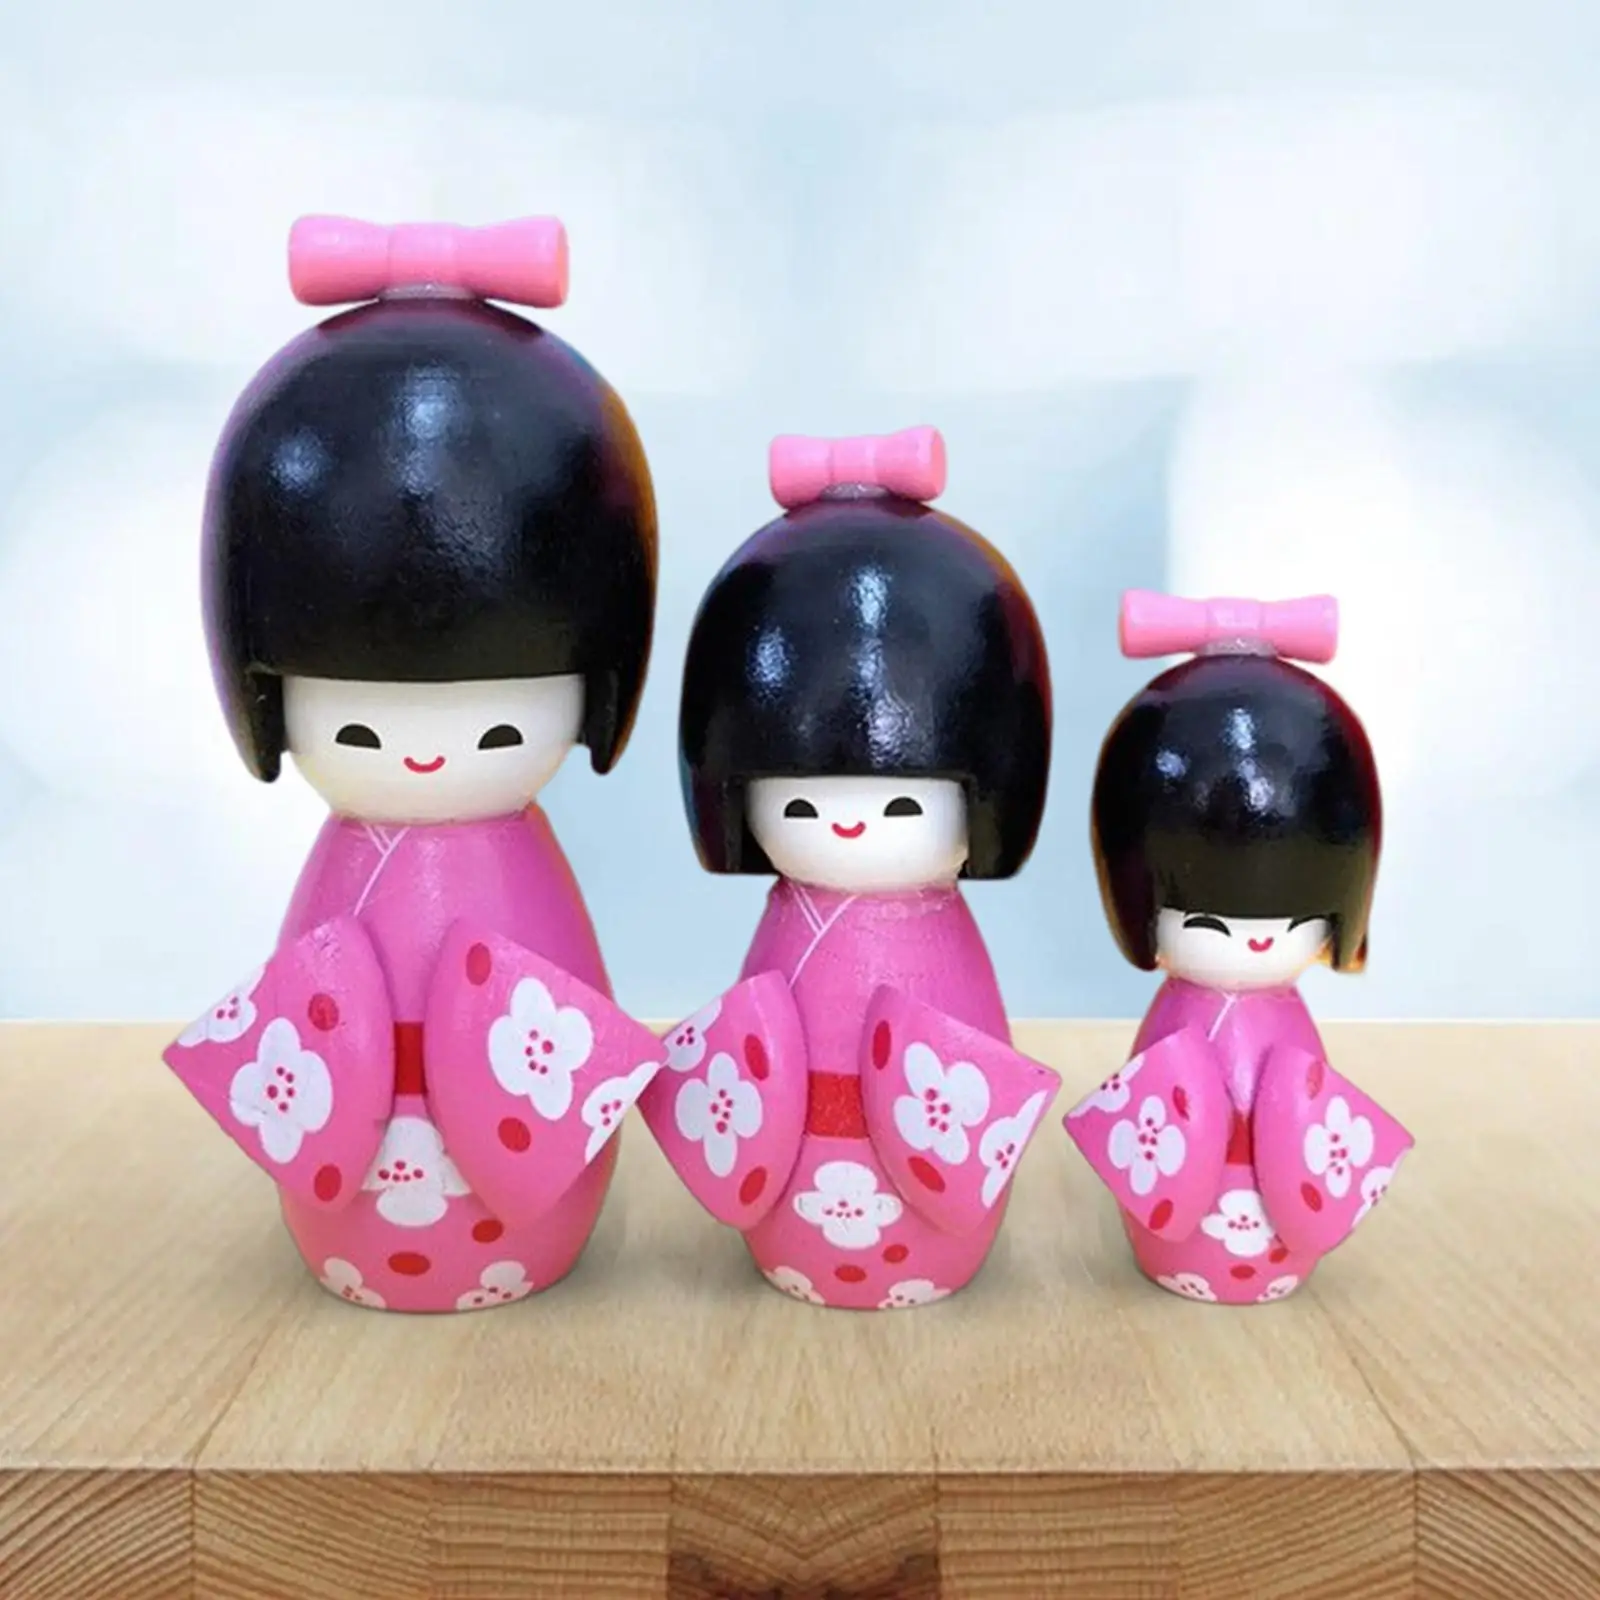 3x Wooden Japanese Doll Collectible Gift Dolls Girls Dolls Toy Doll Figurine for Ornaments Christmas Home Decoration Gifts